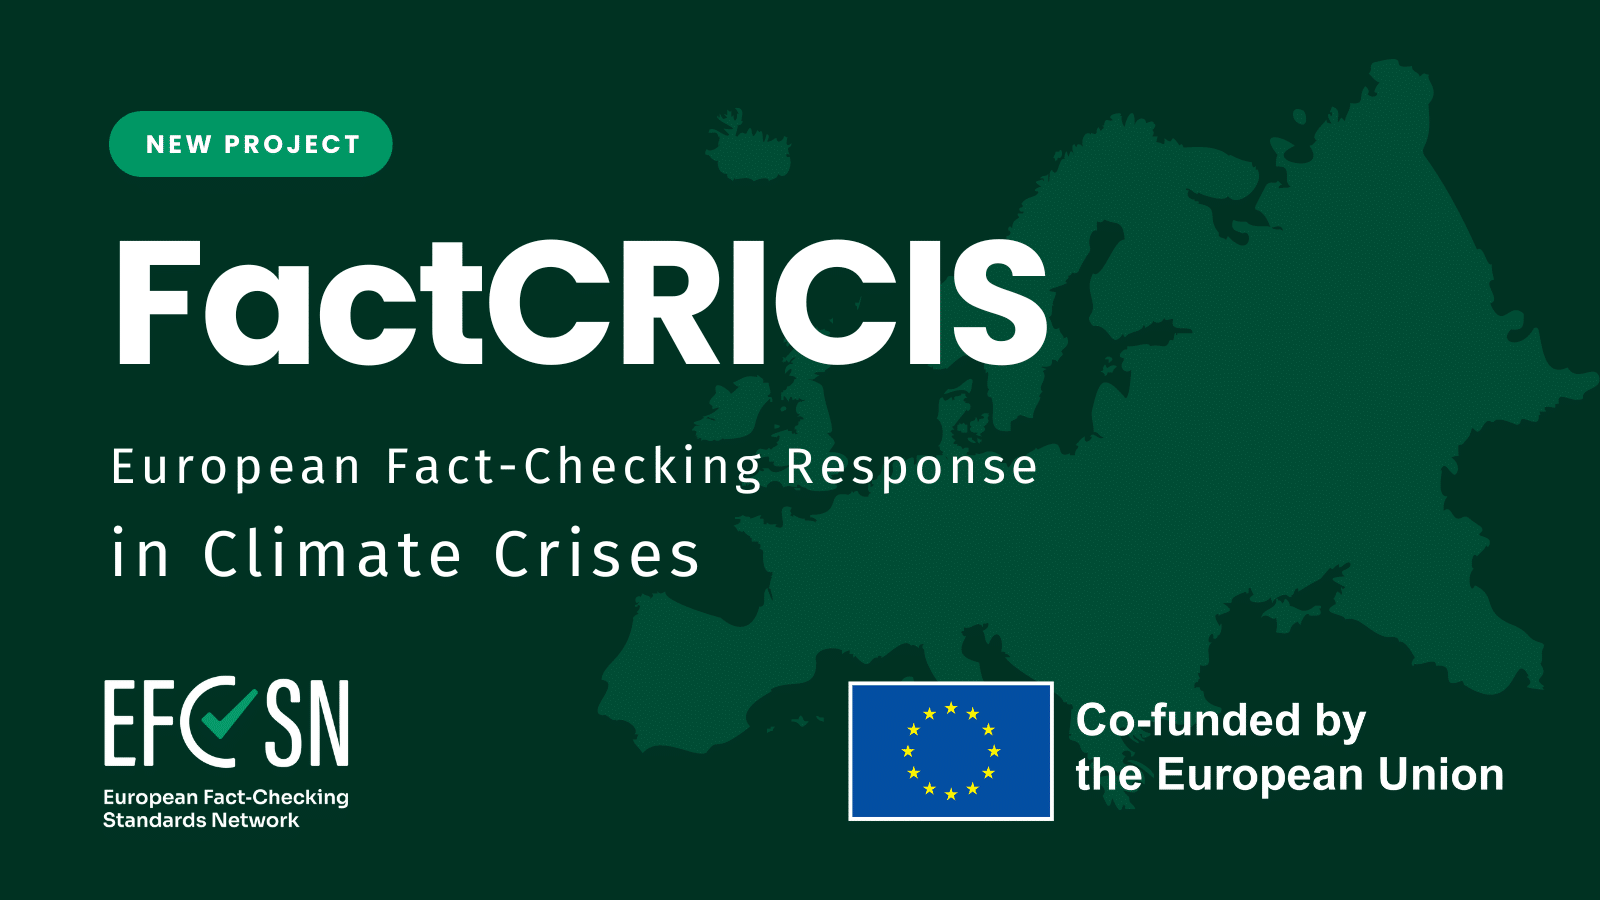 This poster announces a new project collaborated by EFCSN and Science Feedback, called FactCRICIS, which aims to combat disinformation about climate change in Europe. The project is co-funded by the European Union.